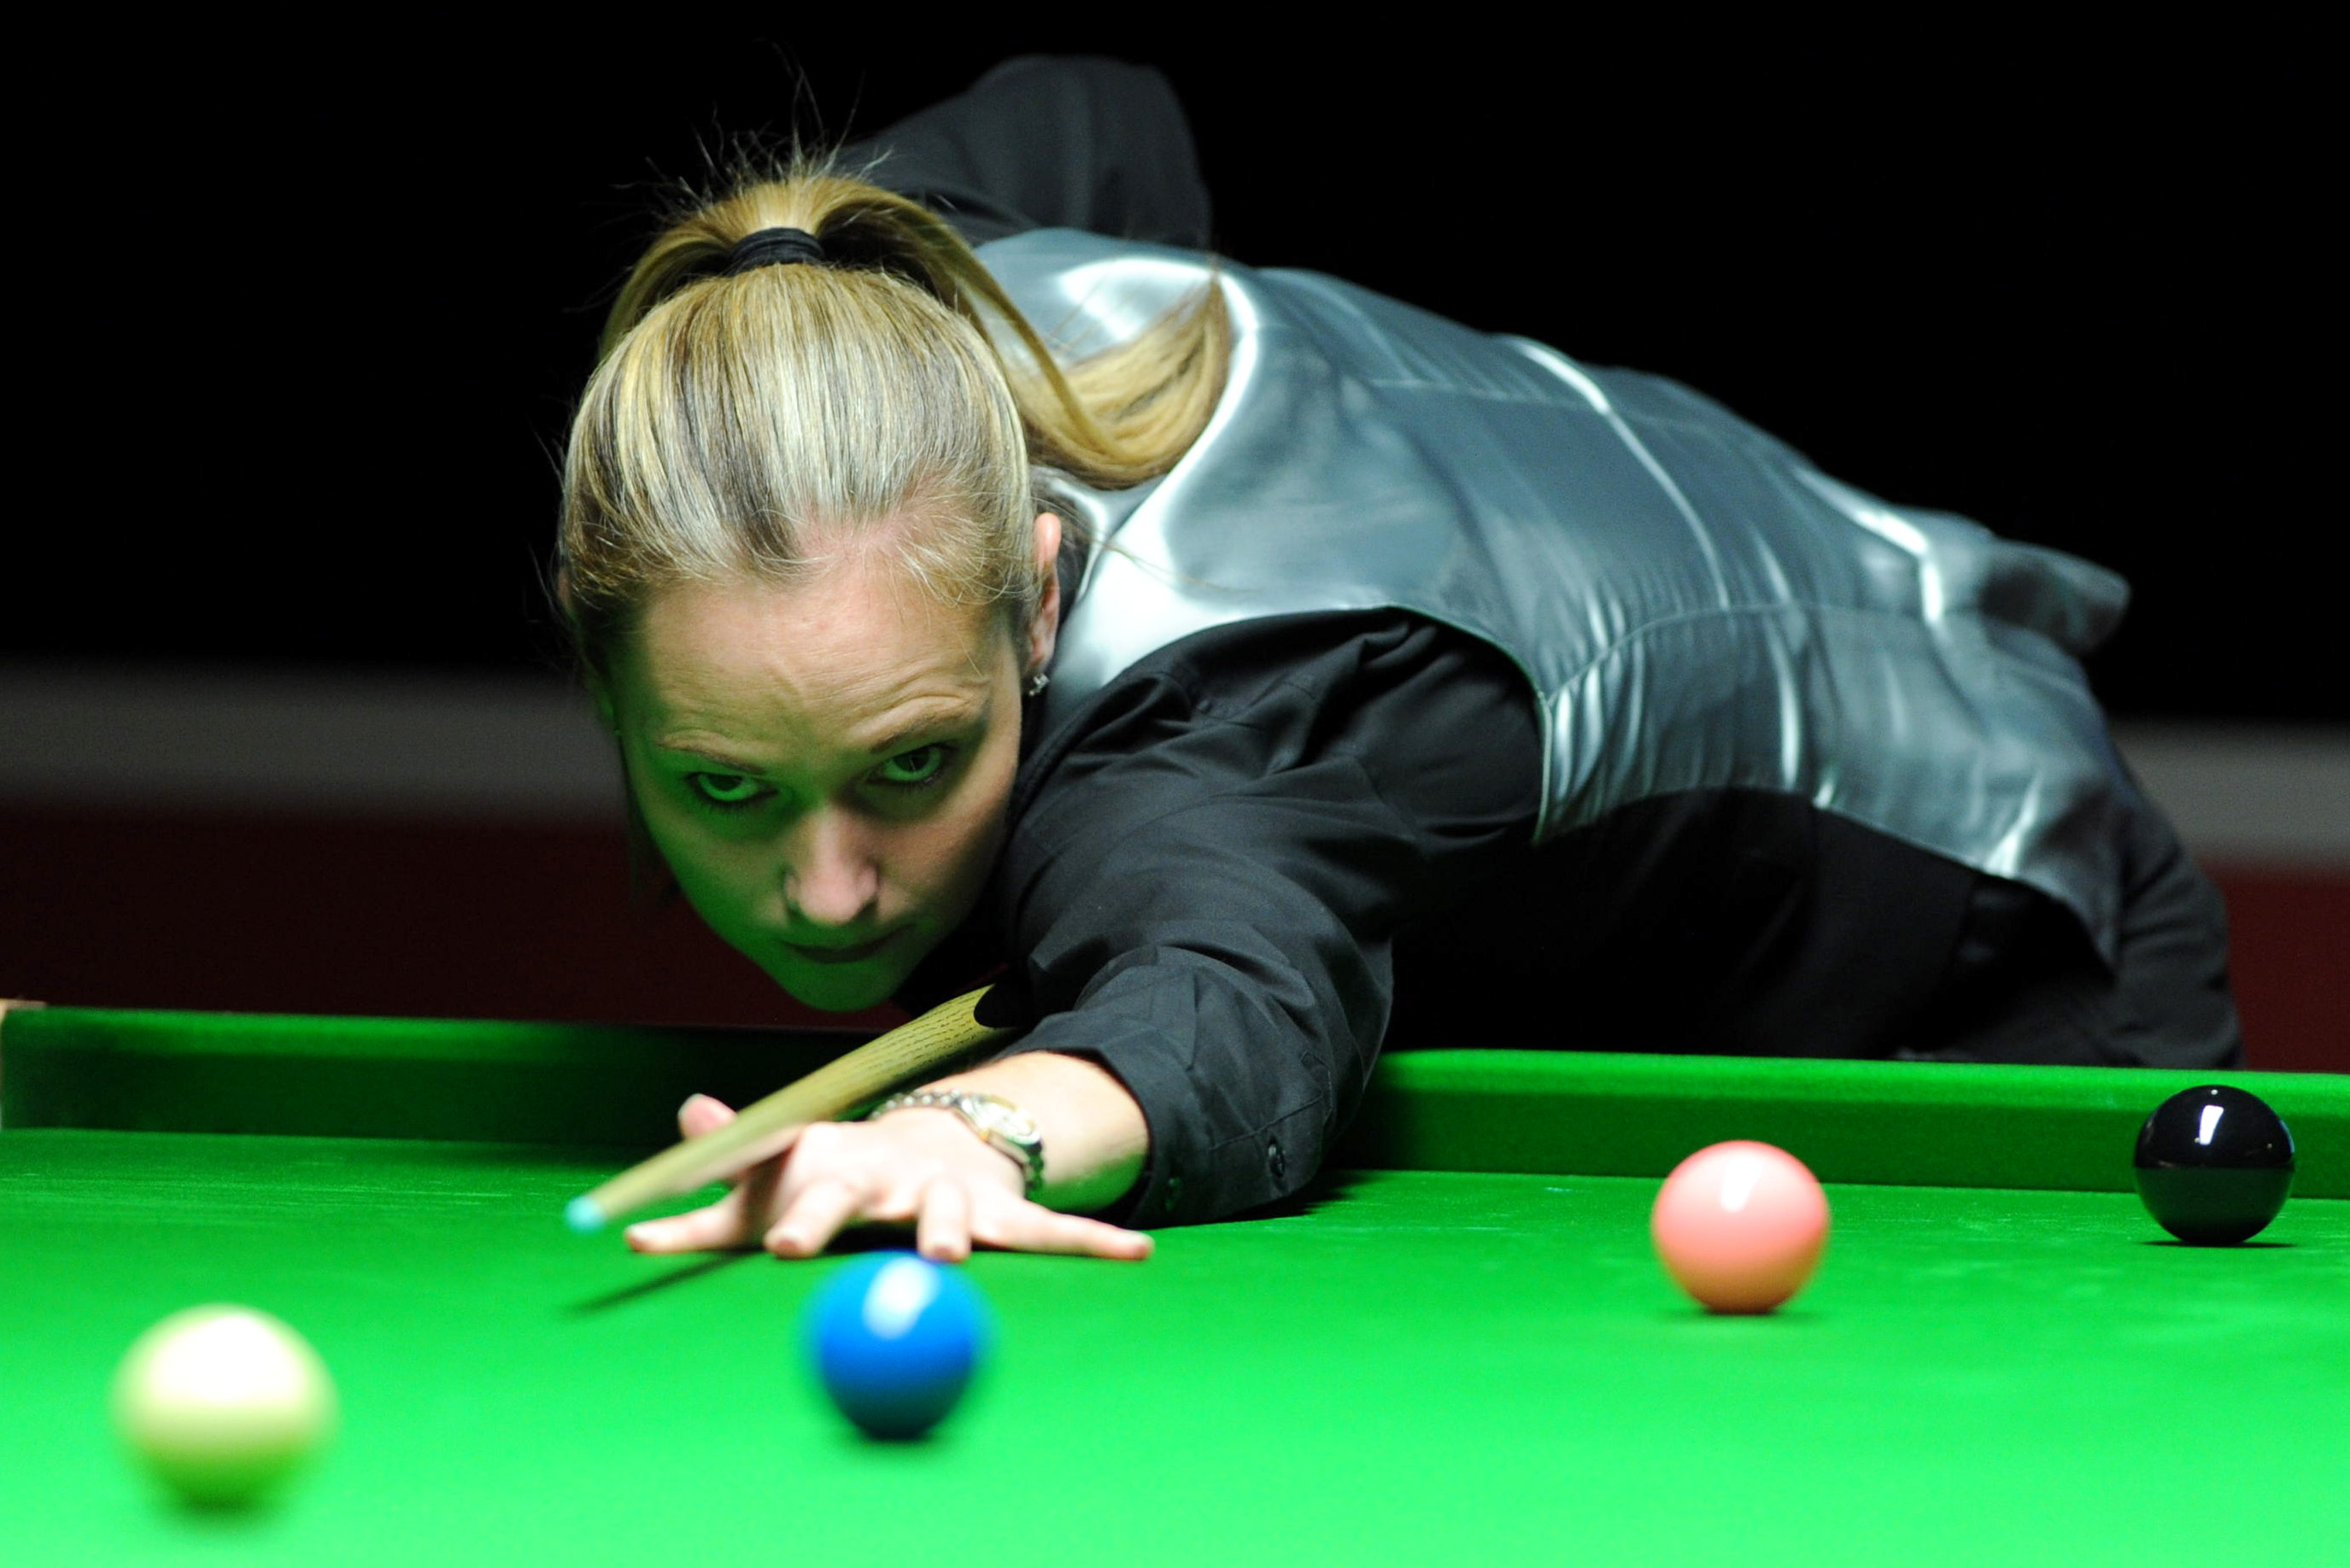 Snooker star Reanne Evans speaks out on the games gender pay gap ahead of Champions match against Shaun Murphy NewsChain